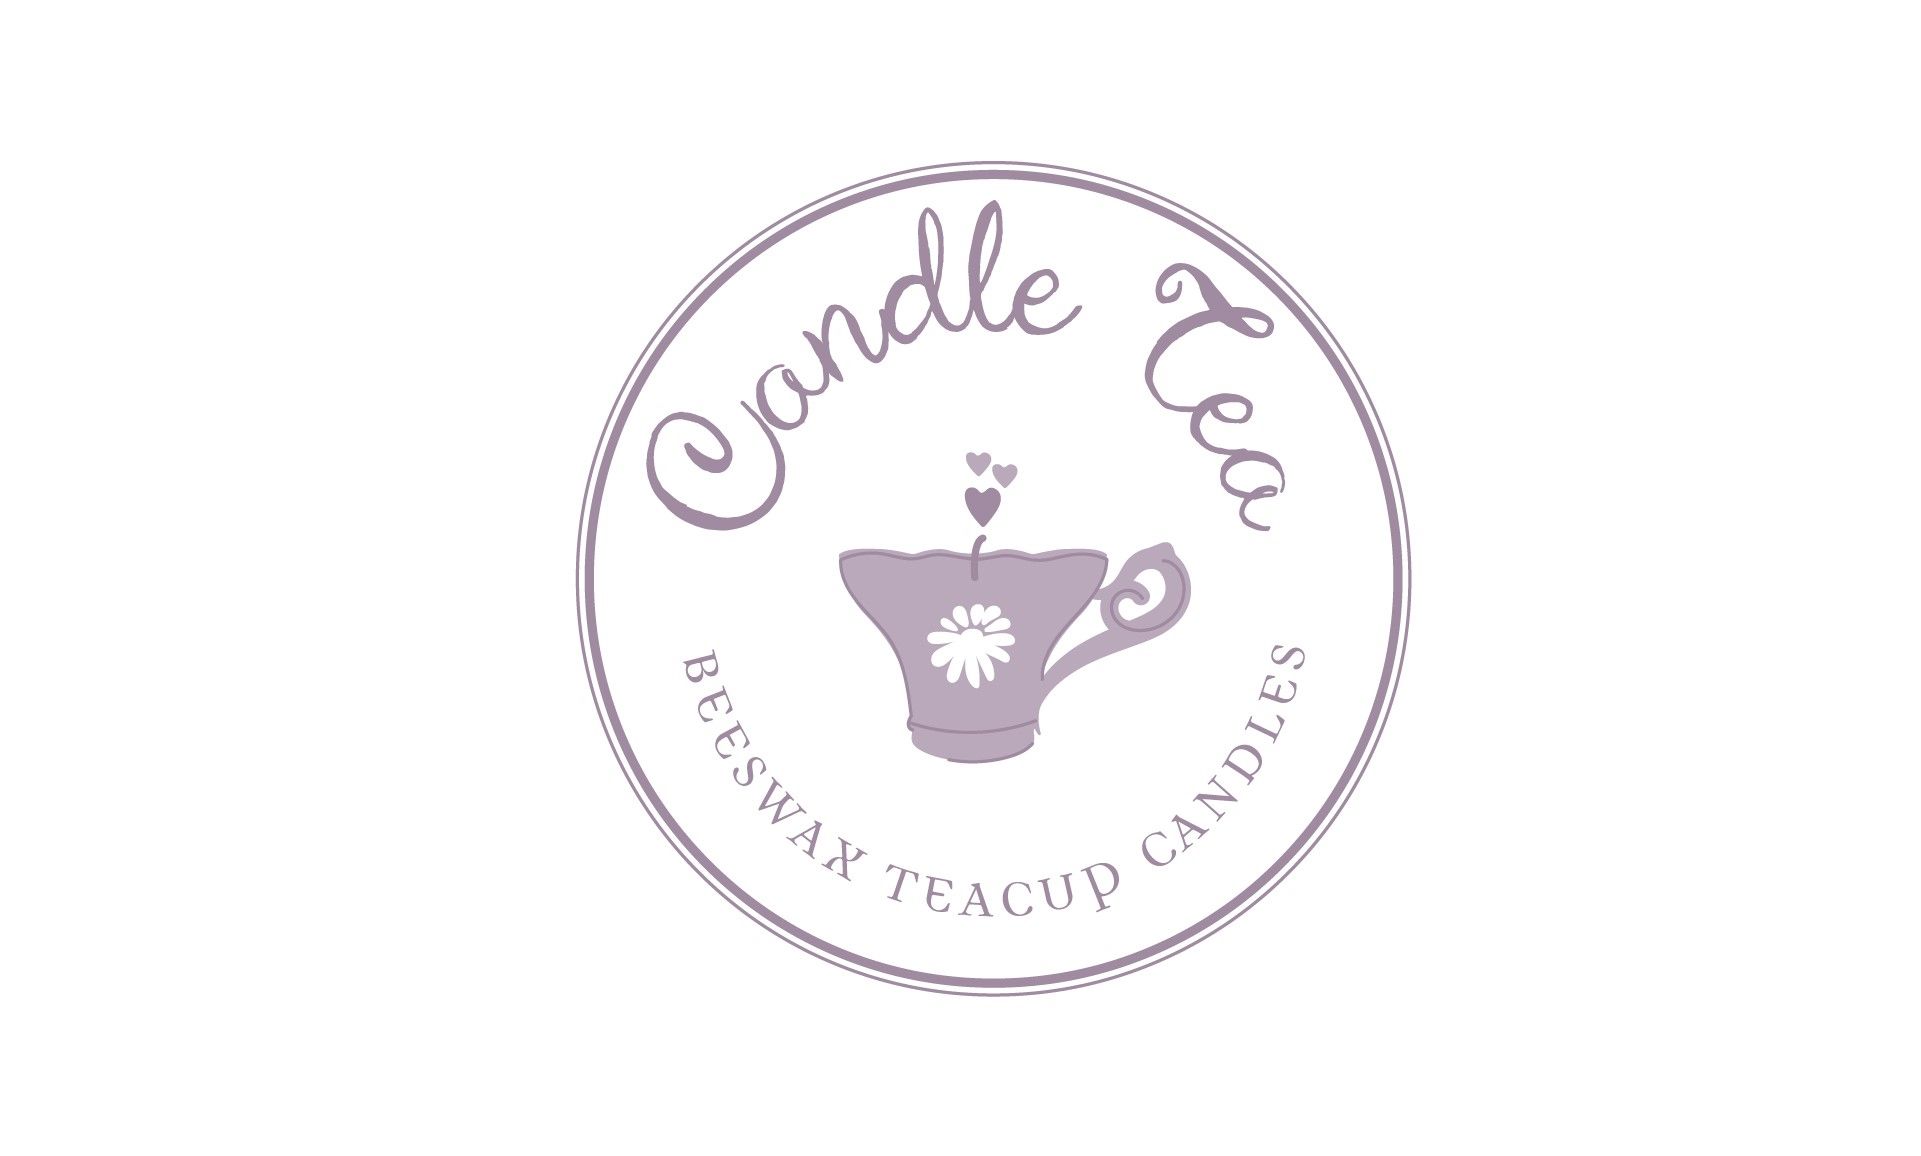 Relax and Light Your Favorite Candle - Candle Tea